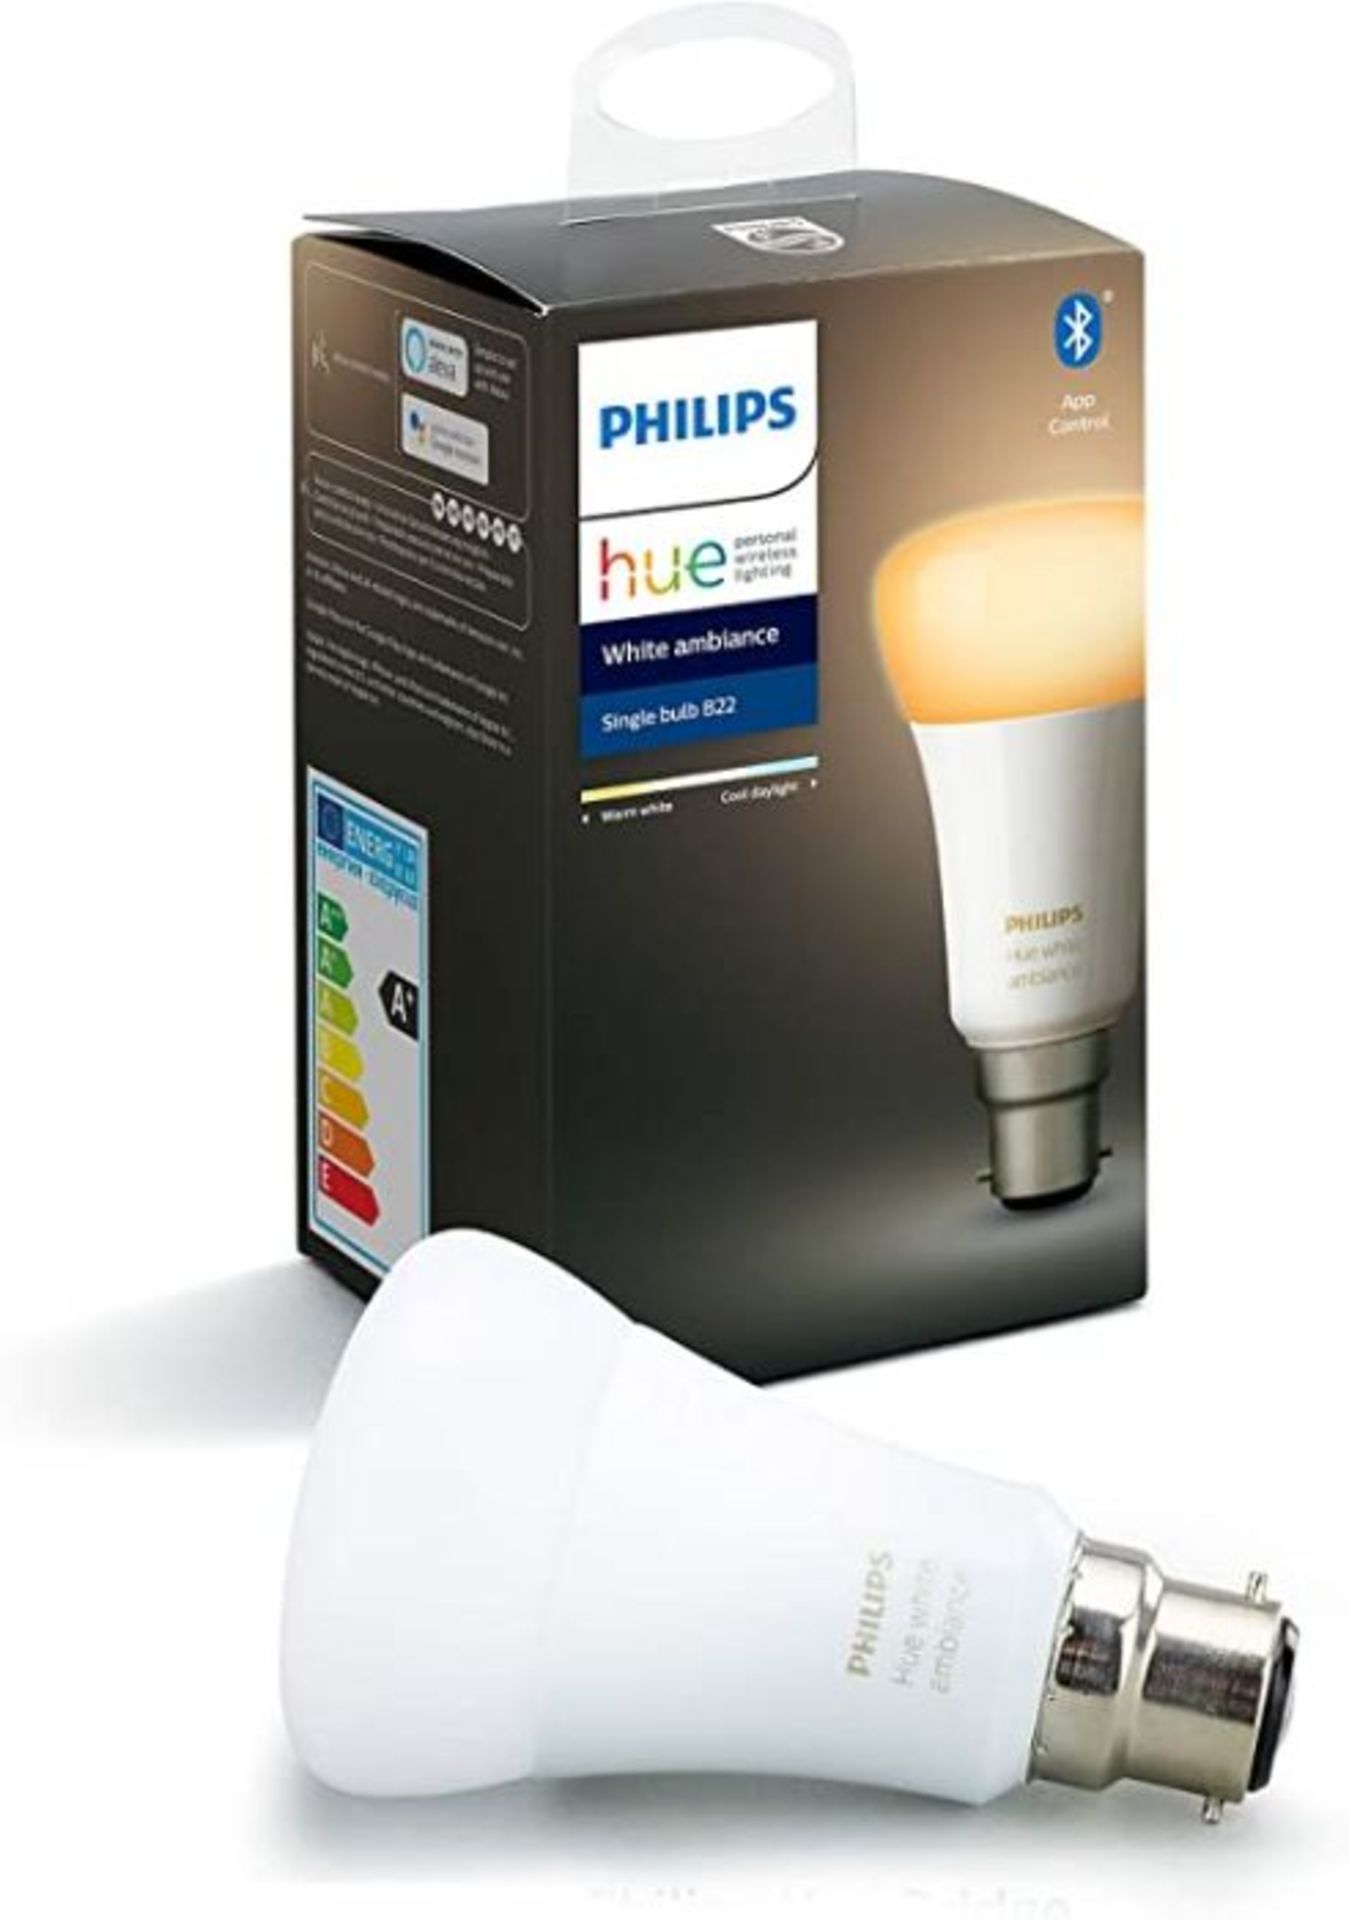 Philips Hue White Ambiance Single Smart Bulb LED [B22 Bayonet Cap] with Bluetooth. Works with - Image 2 of 2